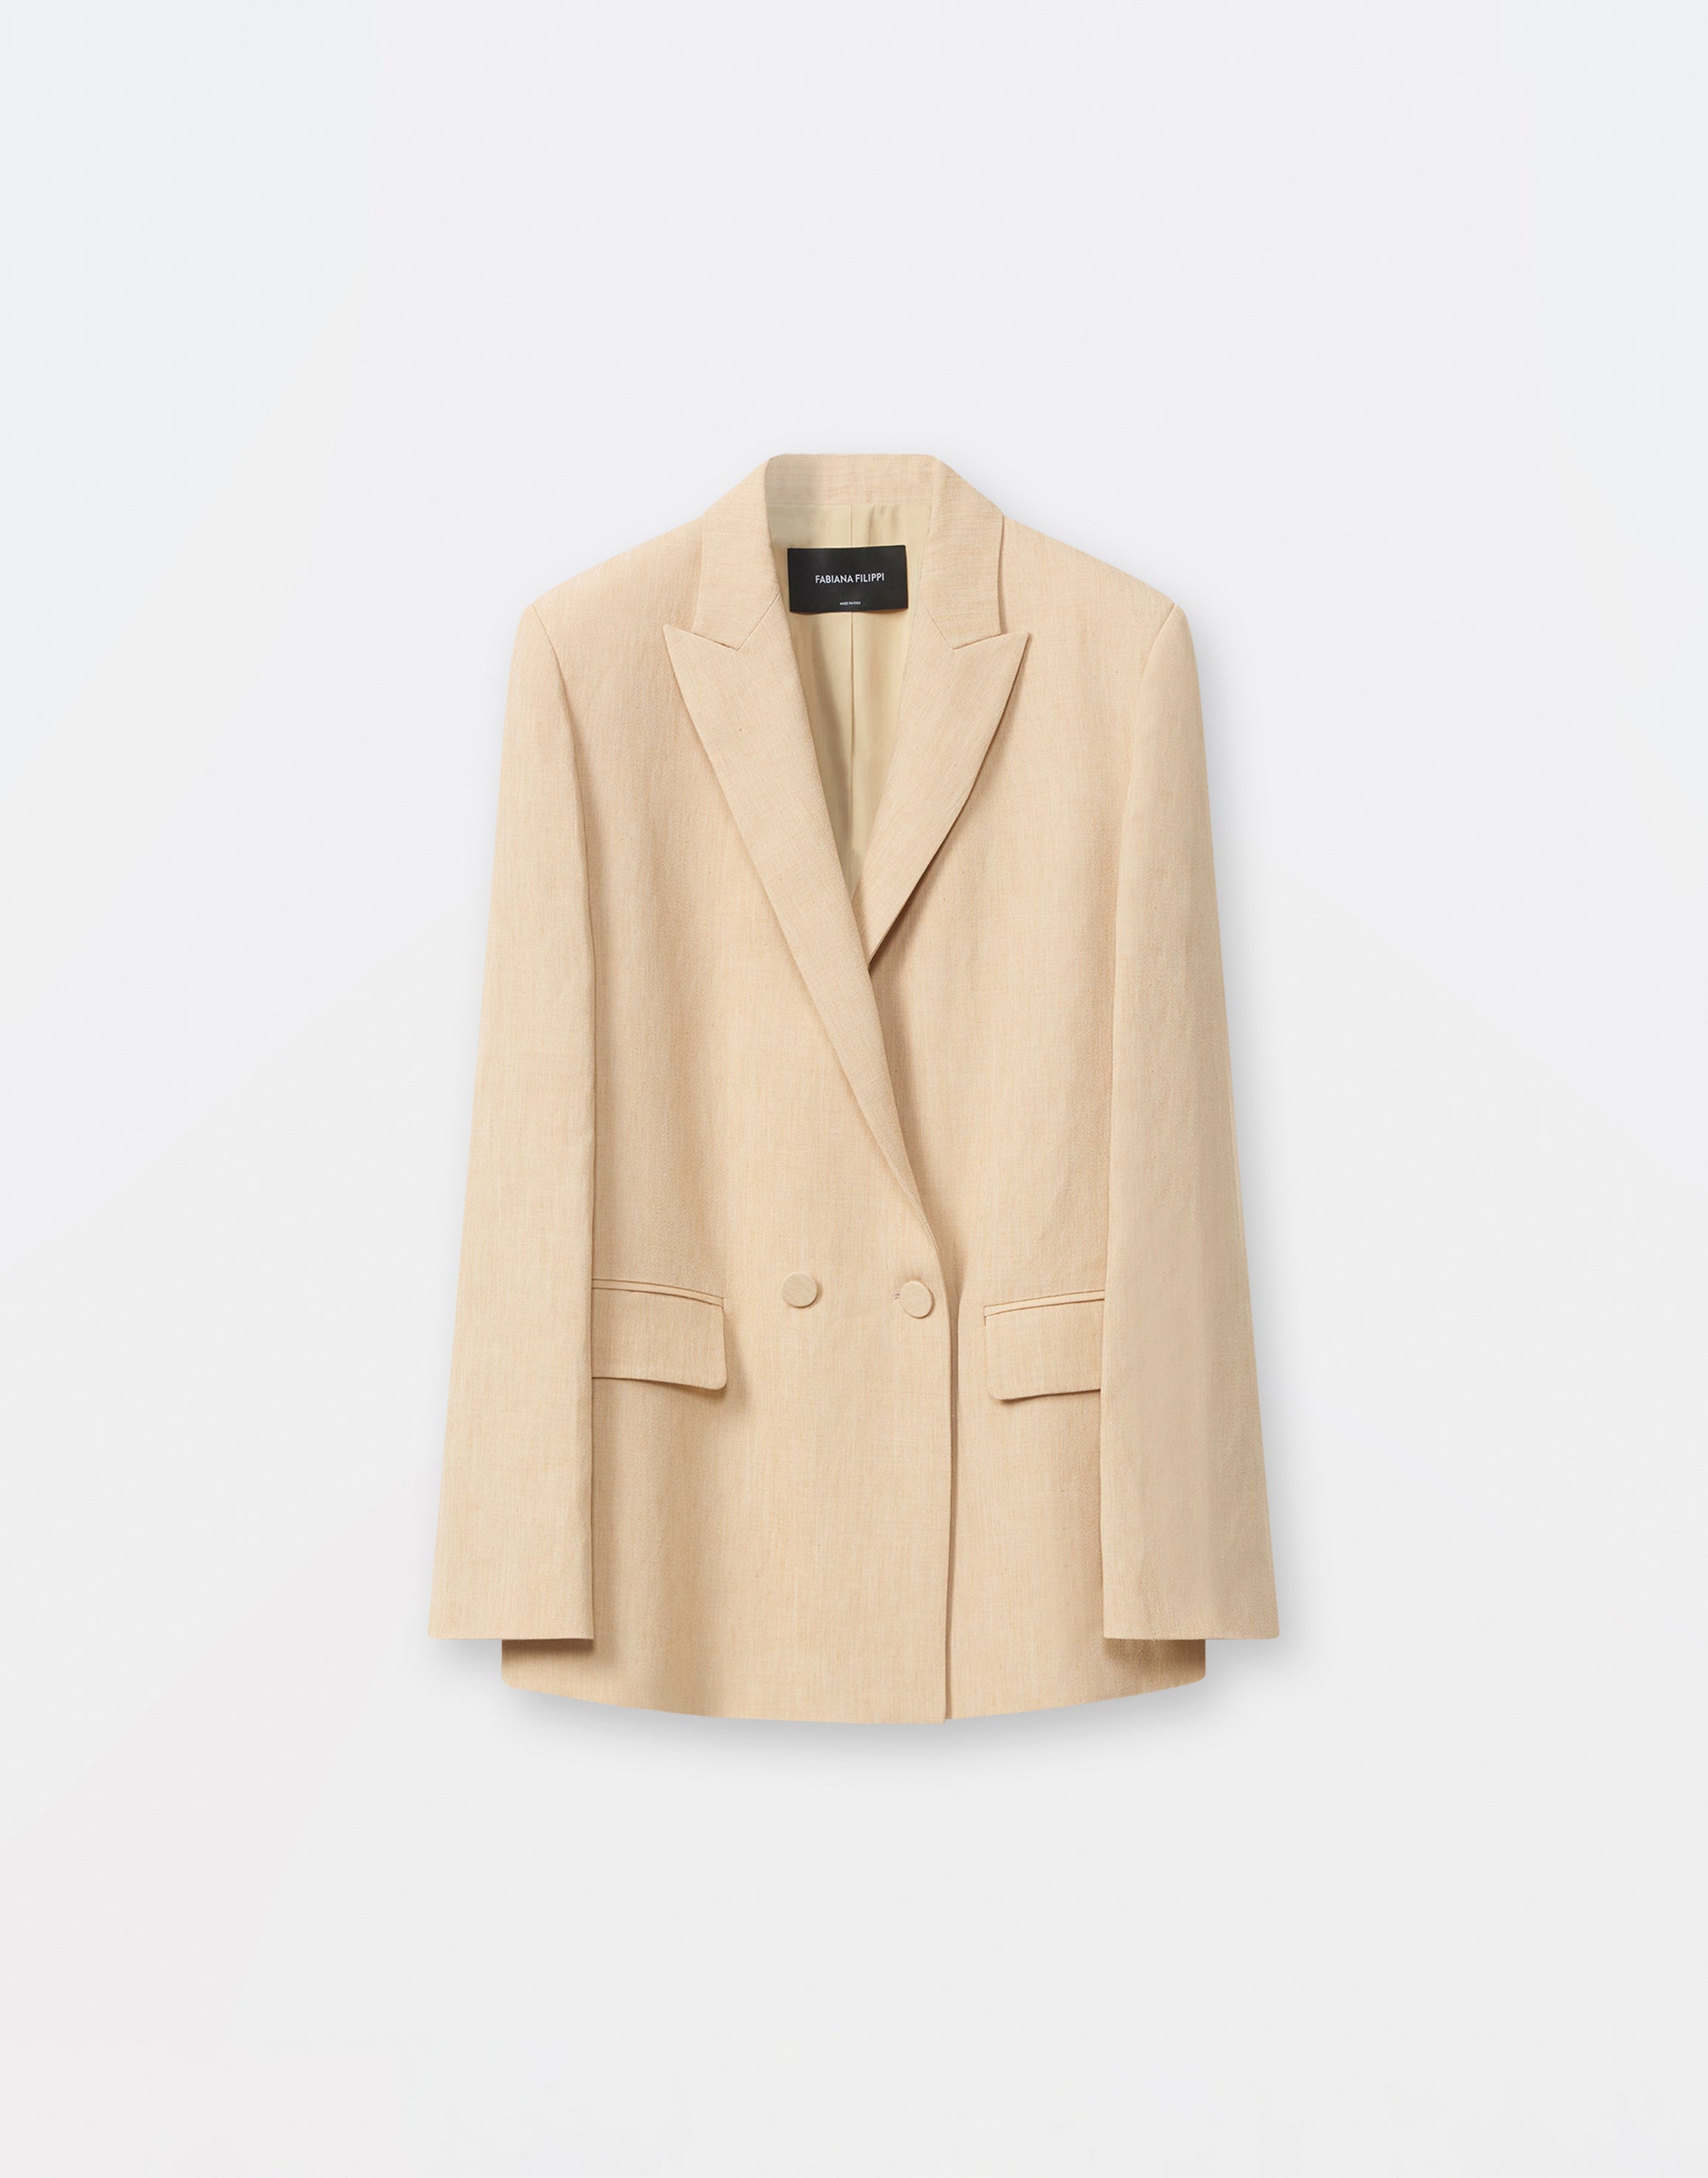 Viscose and linen canvas double-breasted jacket, light wheat